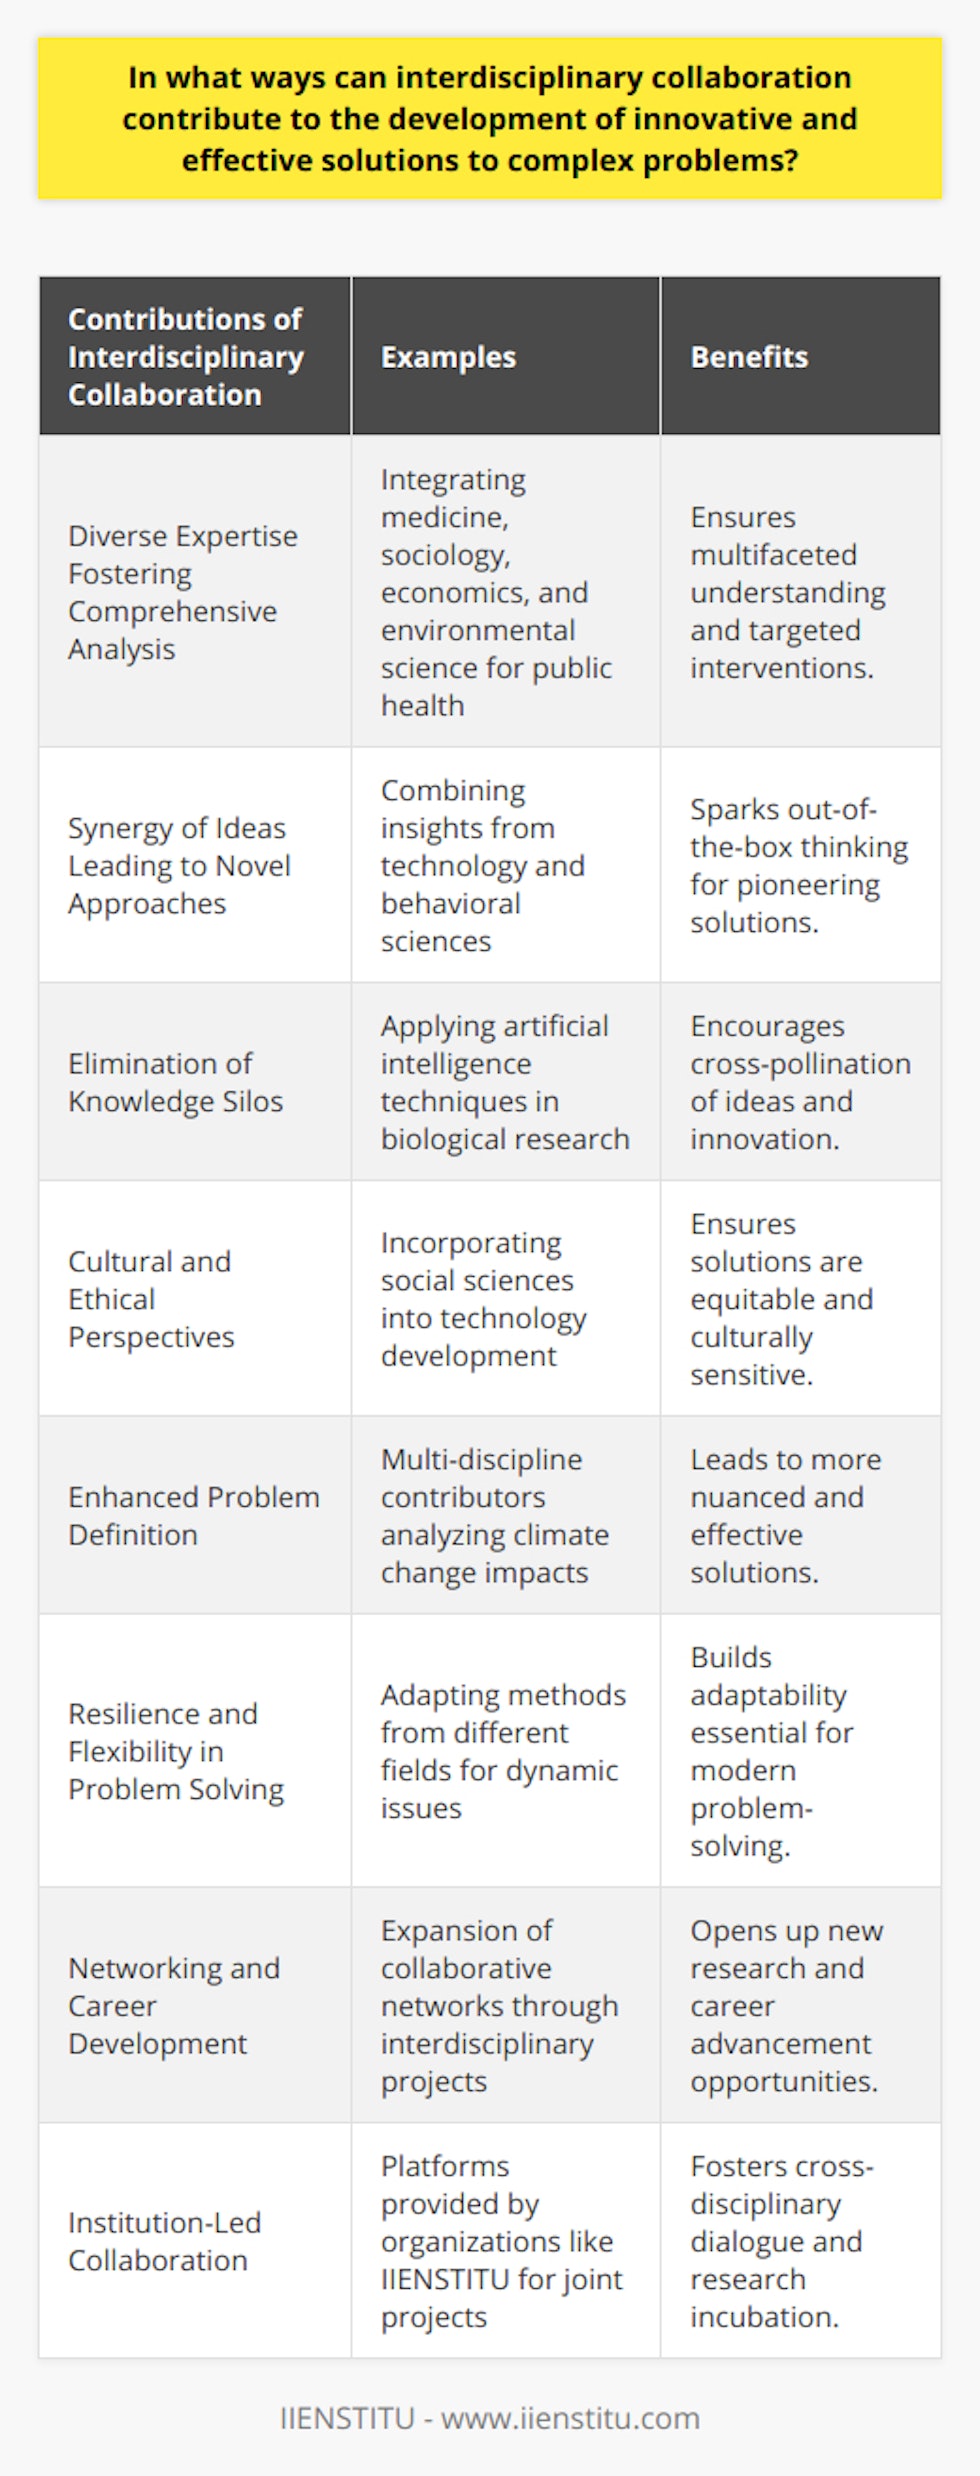 Interdisciplinary collaboration has emerged as a powerful tool to address complex, real-world issues that cannot be adequately understood through a single disciplinary lens. It involves a concerted effort from individuals trained in different disciplines who work together to create solutions by integrating their varied perspectives, methodologies, and expertise. Below are some of the ways interdisciplinary collaboration contributes to innovative and effective problem-solving.**Diverse Expertise Fostering Comprehensive Analysis**Different disciplines bring unique terminologies, methodologies, and conceptual frameworks. Interdisciplinary teams can leverage this diverse expertise to undertake a comprehensive analysis of the problem at hand, ensuring that all aspects are considered. For example, a public health issue might benefit from perspectives in medicine, sociology, economics, and environmental science, leading to a multifaceted understanding and more targeted interventions.**Synergy of Ideas Leading to Novel Approaches**When professionals from various fields collaborate, they exchange ideas that can lead to novel approaches not evident within the confines of a single discipline. This synergy often sparks the kind of out-of-the-box thinking that is necessary for trailblazing solutions. Additionally, collaborators may develop new tools or methodologies that are subsequently beneficial across multiple fields.**Elimination of Knowledge Silos**Disciplinary silos often limit the flow of information between areas of expertise, but interdisciplinary collaboration breaks down these barriers. It encourages the flow of knowledge, allowing for a cross-pollination of ideas that can lead to innovative solutions. For example, techniques from artificial intelligence can significantly advance understanding in biological research, and vice versa.**Cultural and Ethical Perspectives**Including disciplines that focus on cultural, ethical, and social issues enrich the problem-solving process by grounding technical solutions in human-centered considerations. This ensures that solutions are not only effective but also equitable and sensitive to cultural nuances.**Enhanced Problem Definition**Interdisciplinary collaboration can lead to a more nuanced definition of the problem, one that reflects the complexity of real-world issues. When participants define a problem collectively from various disciplinary perspectives, they are more likely to arrive at innovative solutions that are attuned to the nuances of that problem.**Resilience and Flexibility in Problem Solving**Working interdisciplinarily fosters resilience and flexibility among team members, as they become accustomed to shifting perspectives and adapting to new ways of thinking. This adaptability is crucial for tackling problems that are constantly changing or have emerging data.**Networking and Career Development**Collaborative networks create opportunities for professional growth. Participants in interdisciplinary collaboration expand their professional networks, which can lead to new research opportunities, joint publications, and grant prospects.**Institution-Led Collaboration:**Institutes like IIENSTITU strive to facilitate interdisciplinary collaborations by providing platforms where individuals from disparate fields can interact, share knowledge, and work on joint projects. They serve as incubators for cross-disciplinary dialogue and innovation.Interdisciplinary collaboration stands as a testament to the principle that the sum is greater than its parts. By unifying distinct fields of study, it creates a fertile ground for innovation, leading to solutions that are not only more effective but also robust, sustainable, and acceptable to a broader range of stakeholders. It calls upon the modern problem-solver to be versatile, embracing the richness that different fields offer in order to address the complex and interconnected challenges of our time.